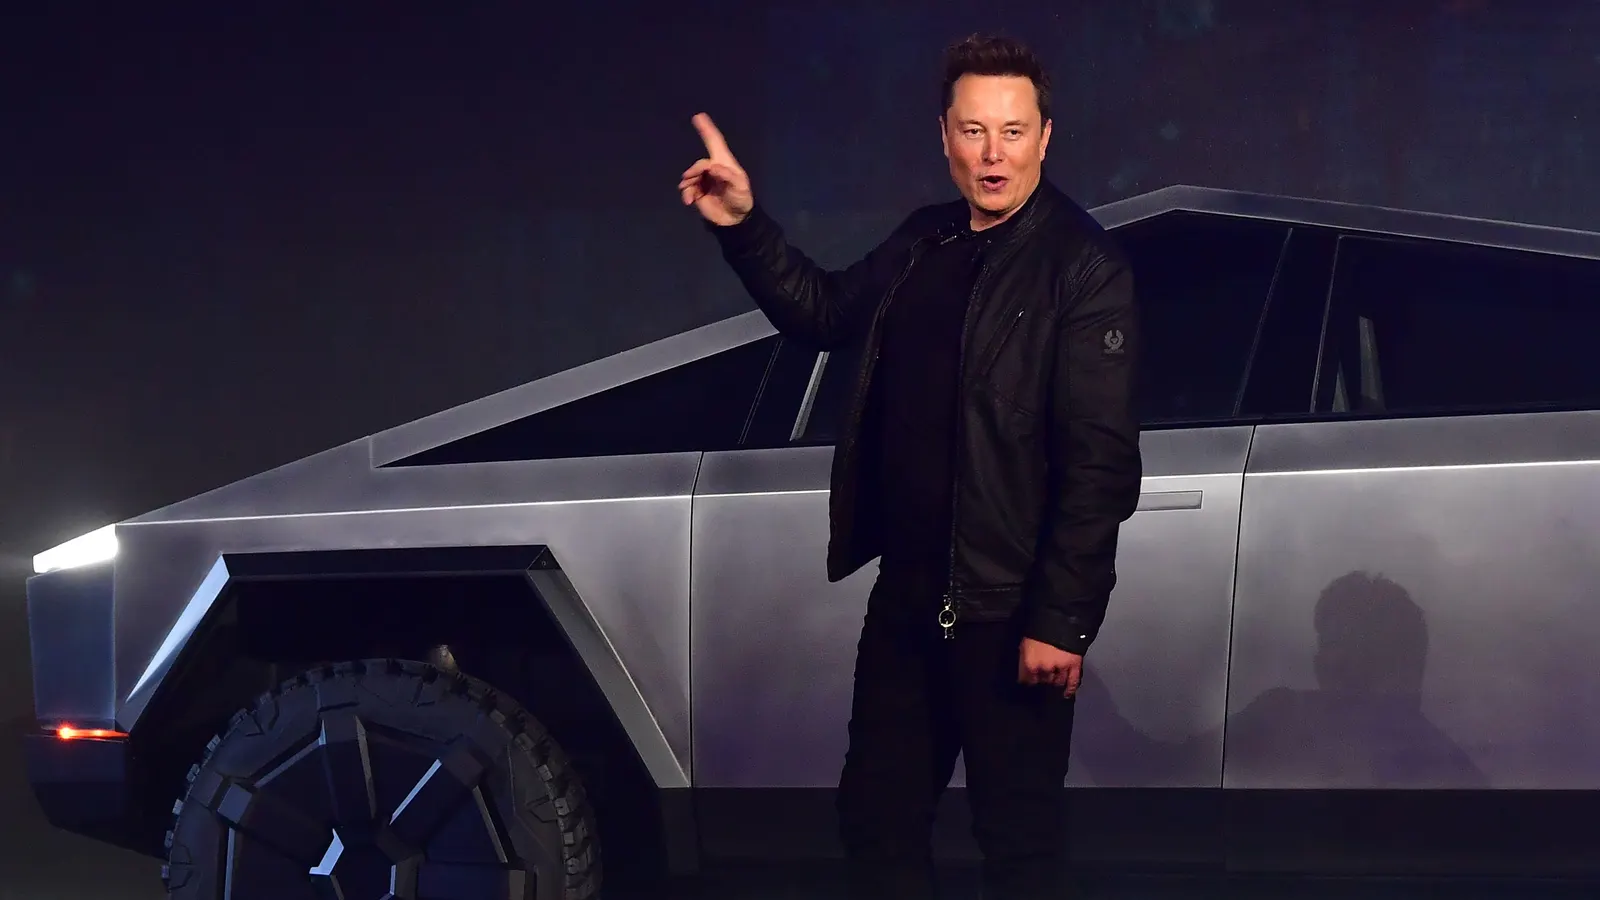 Elon Musk Wants to Export Tesla Cybertrucks to China but Can't Due to One Technicality